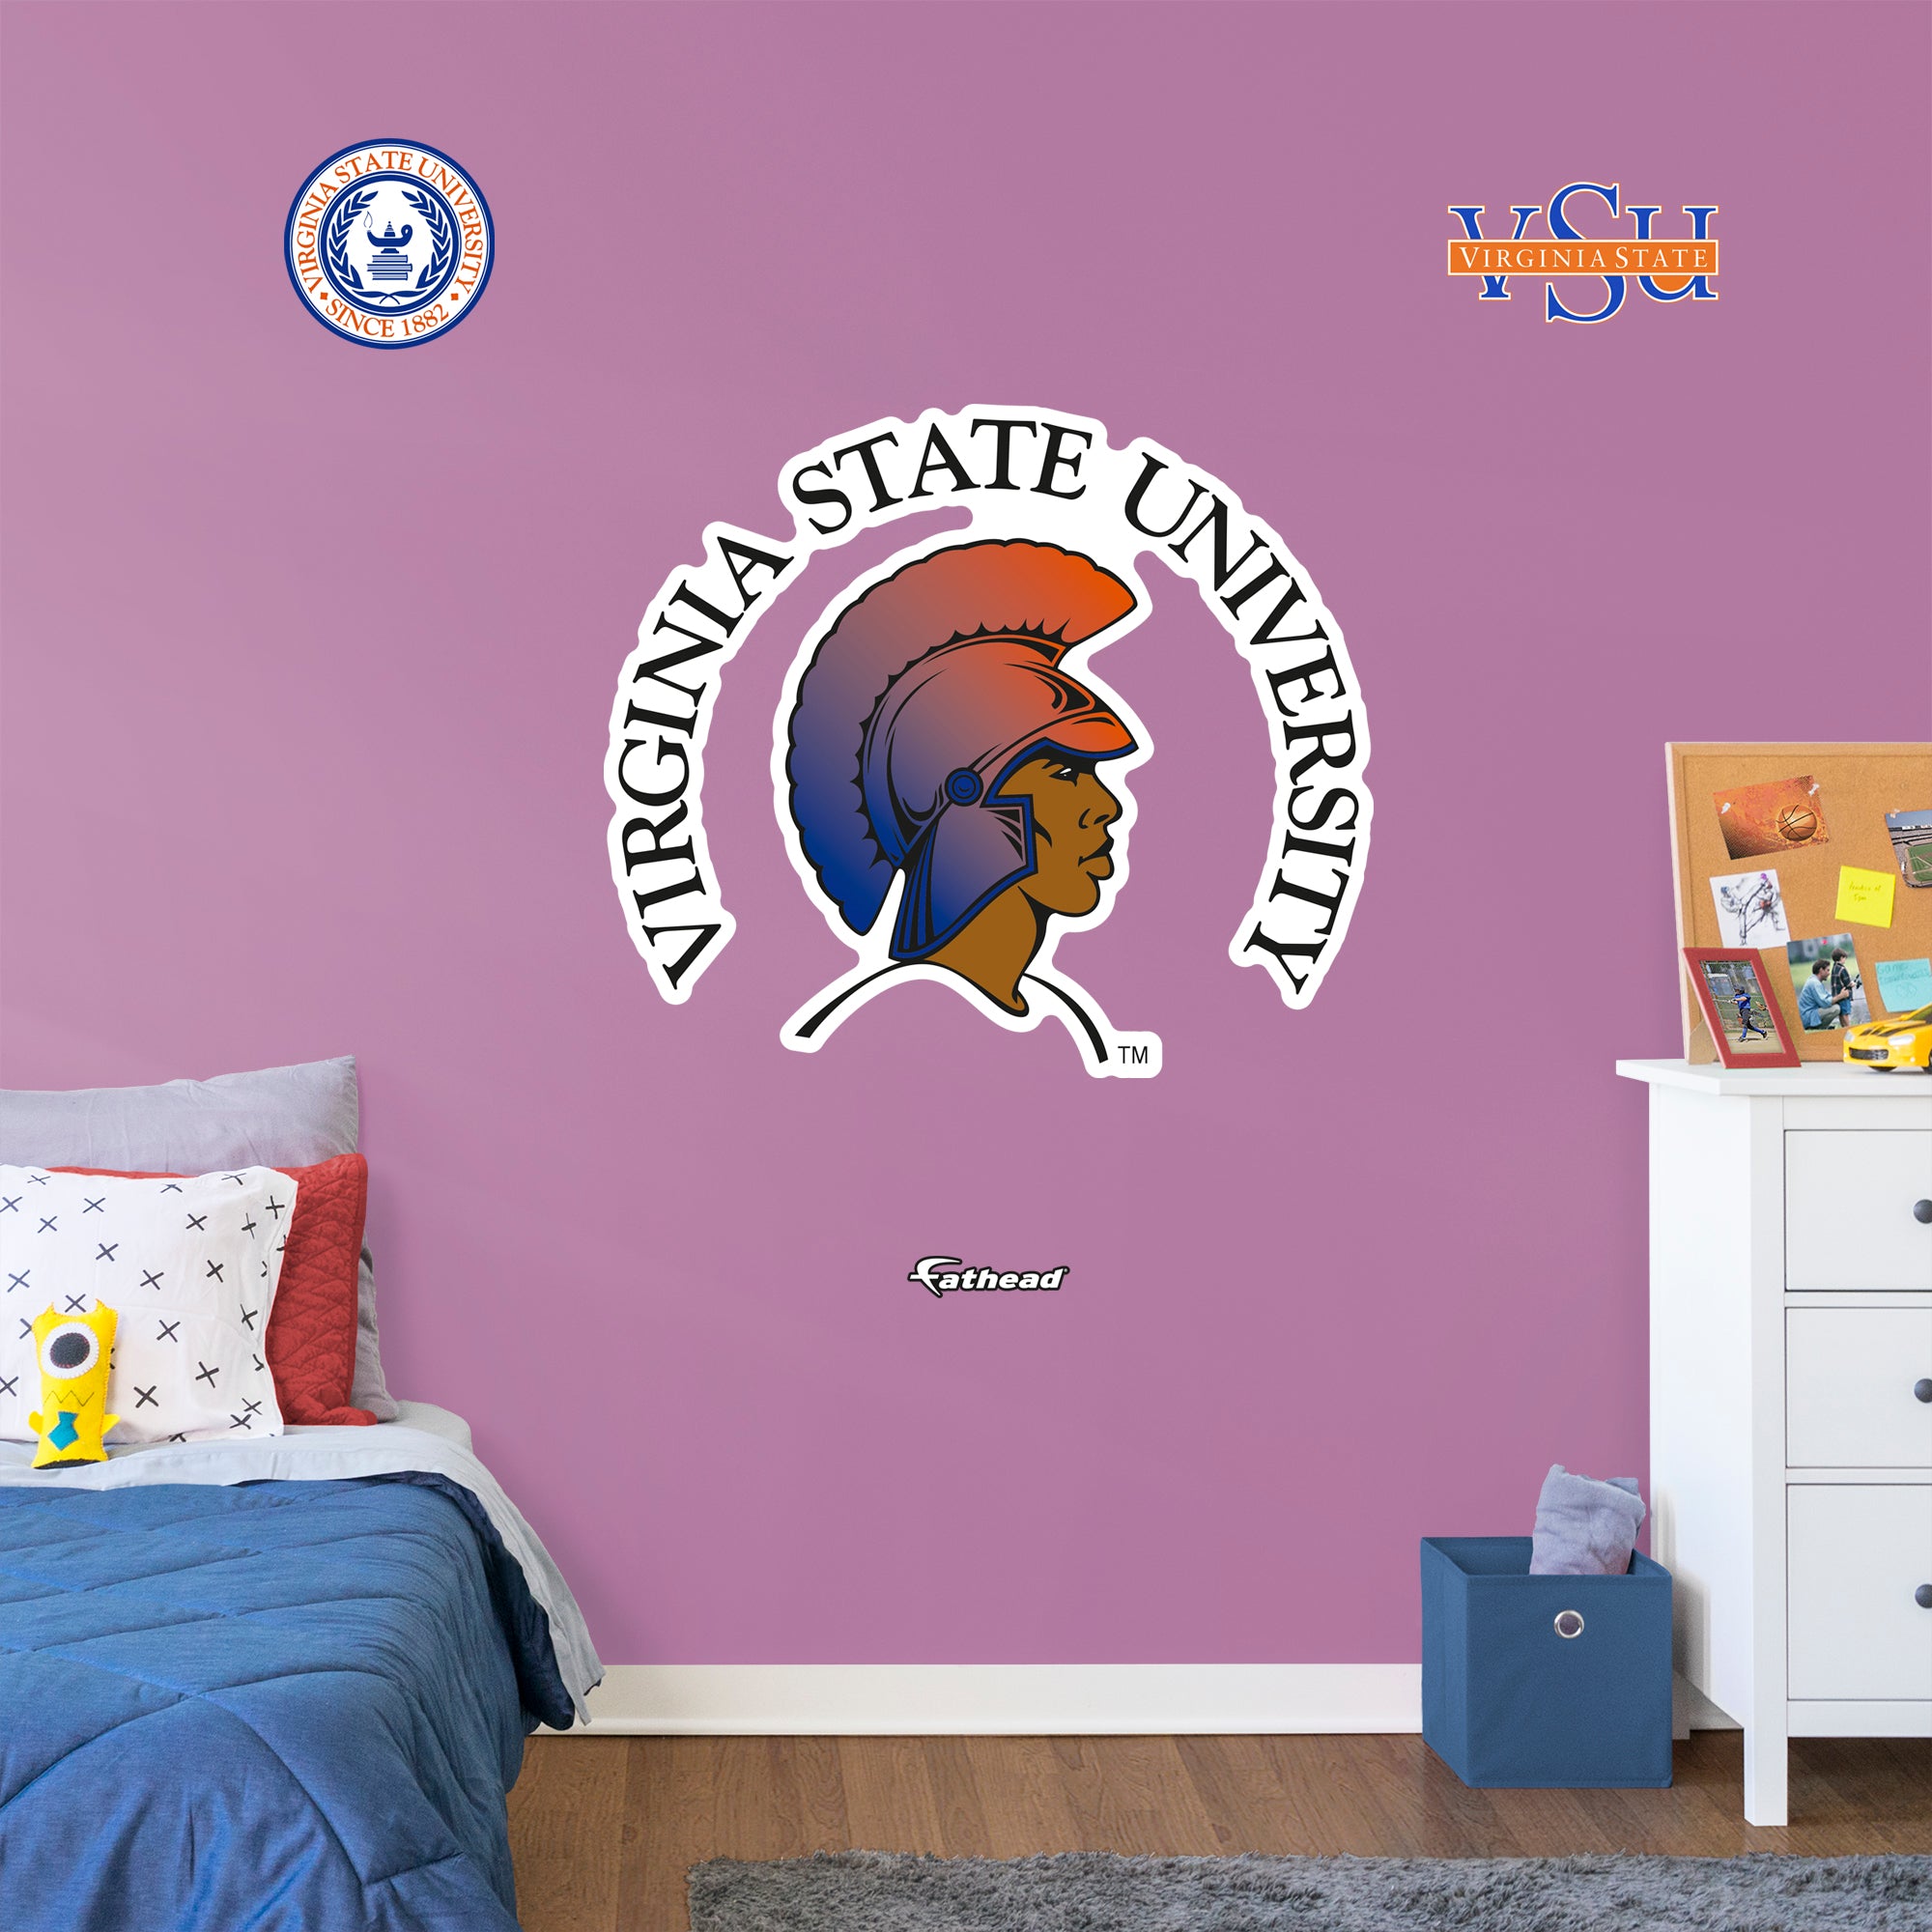 Virginia State University 2020 RealBig - Officially Licensed NCAA Removable Wall Decal Giant Decal (37"W x 42"H) by Fathead | Vi